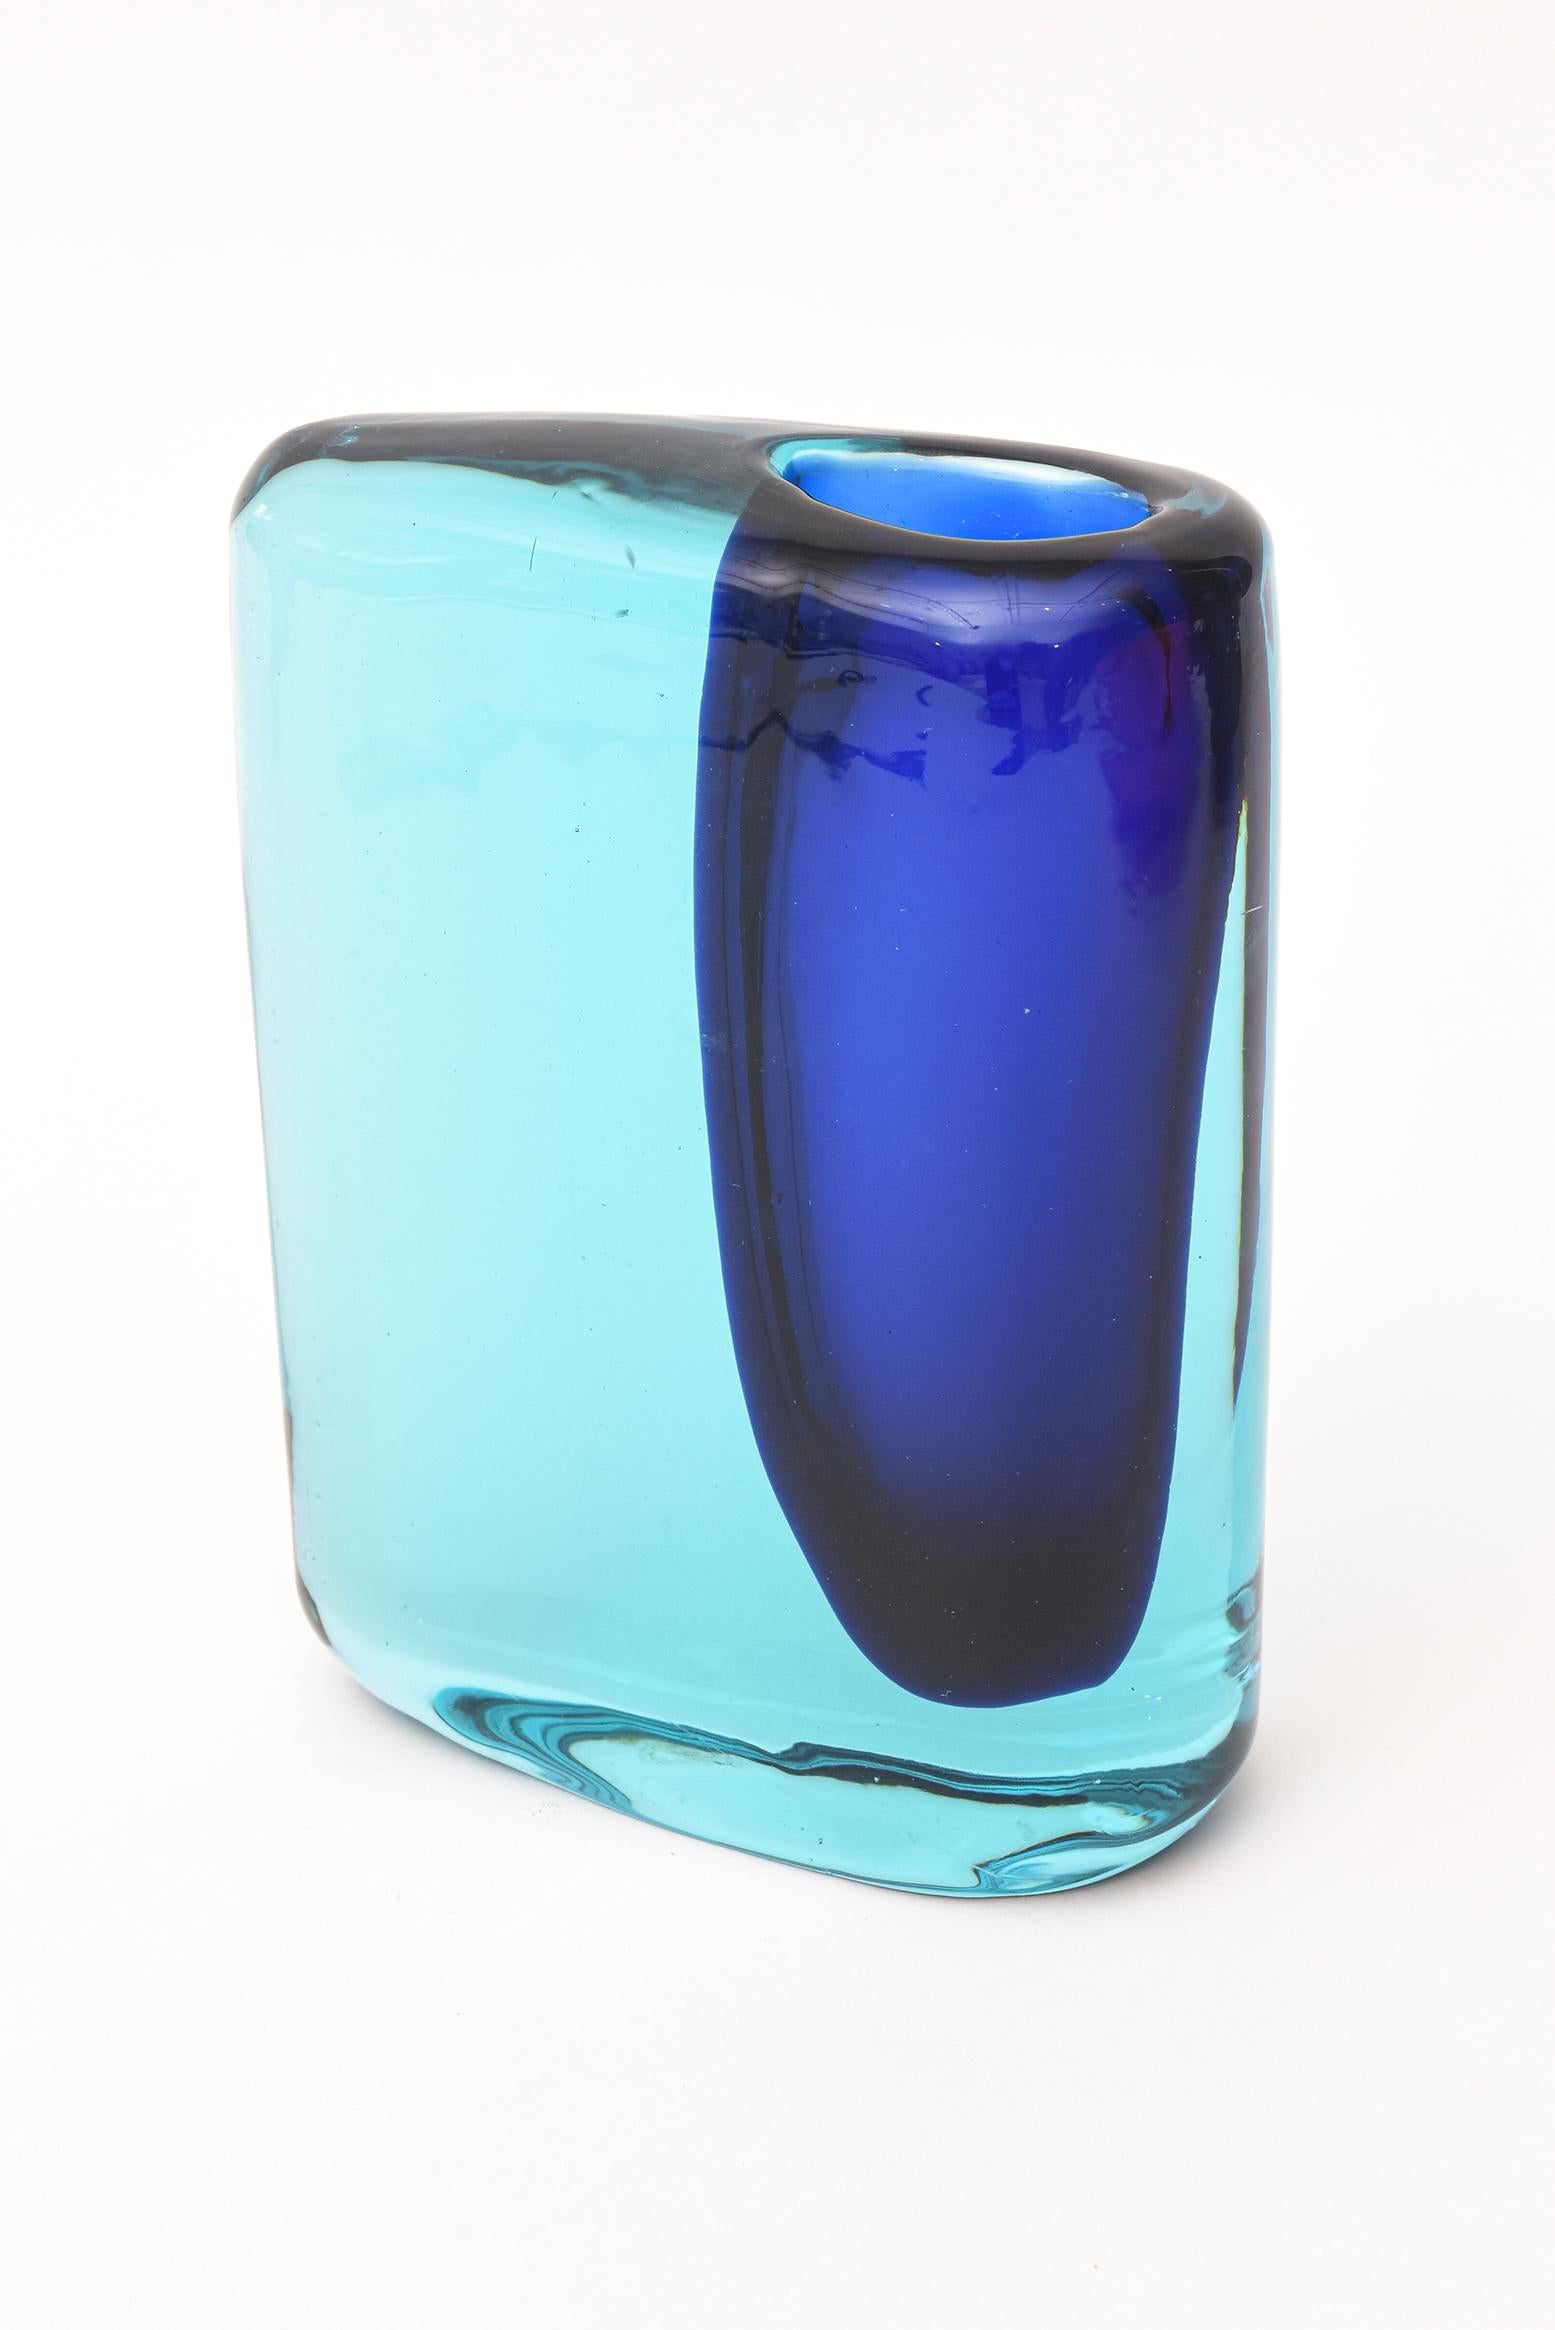 This vibrant and fabulous Antonio da Ros for Cenedese Italian Murano vintage sommerso sculptural vase has the brilliant duality of colors of turquoise and cobalt blue. The cobalt blue glass blob hangs suspended. It is thick walled and from the